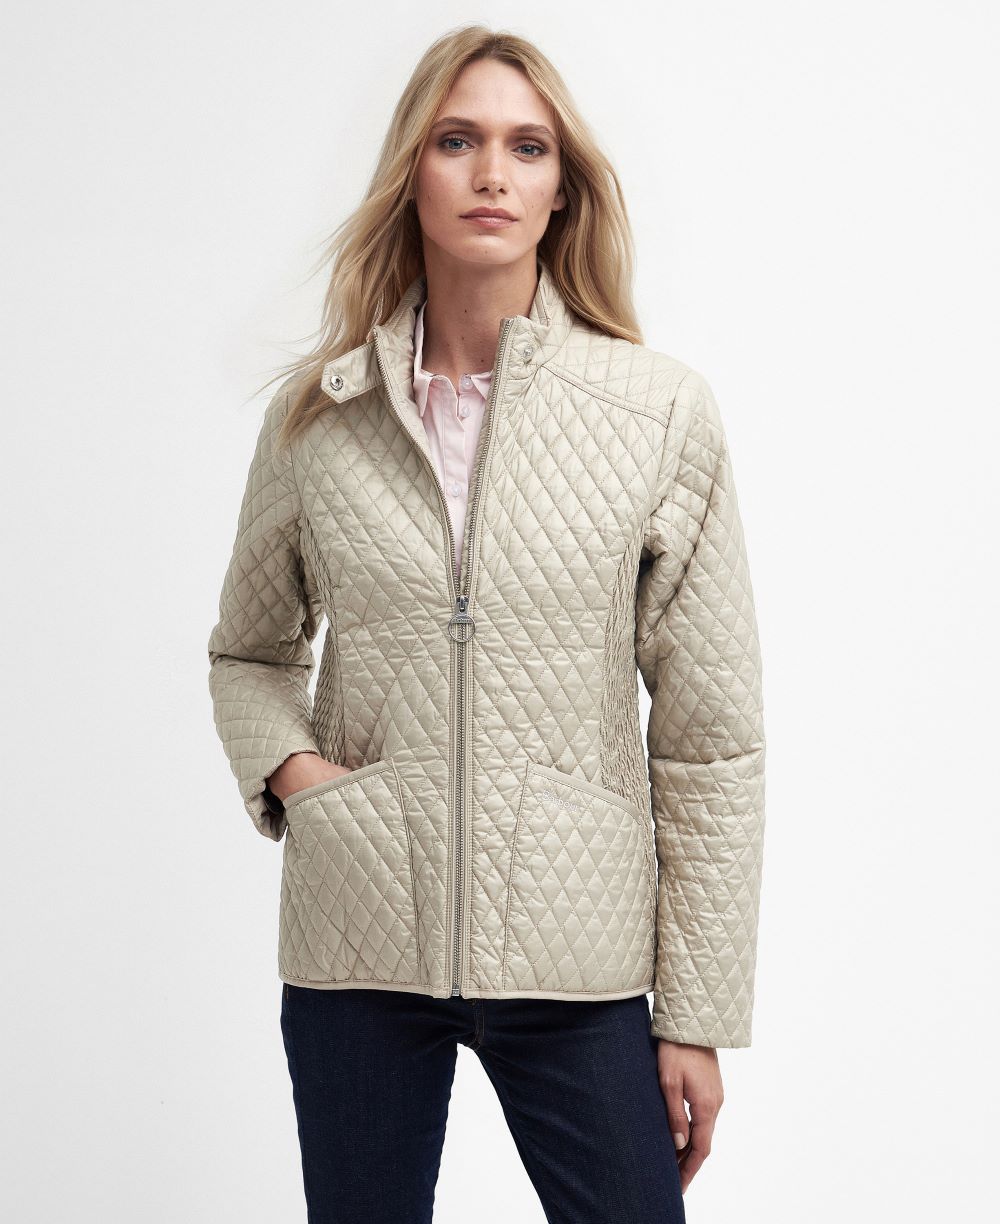 Barbour Ladies Swallow Quilt in Light Sand